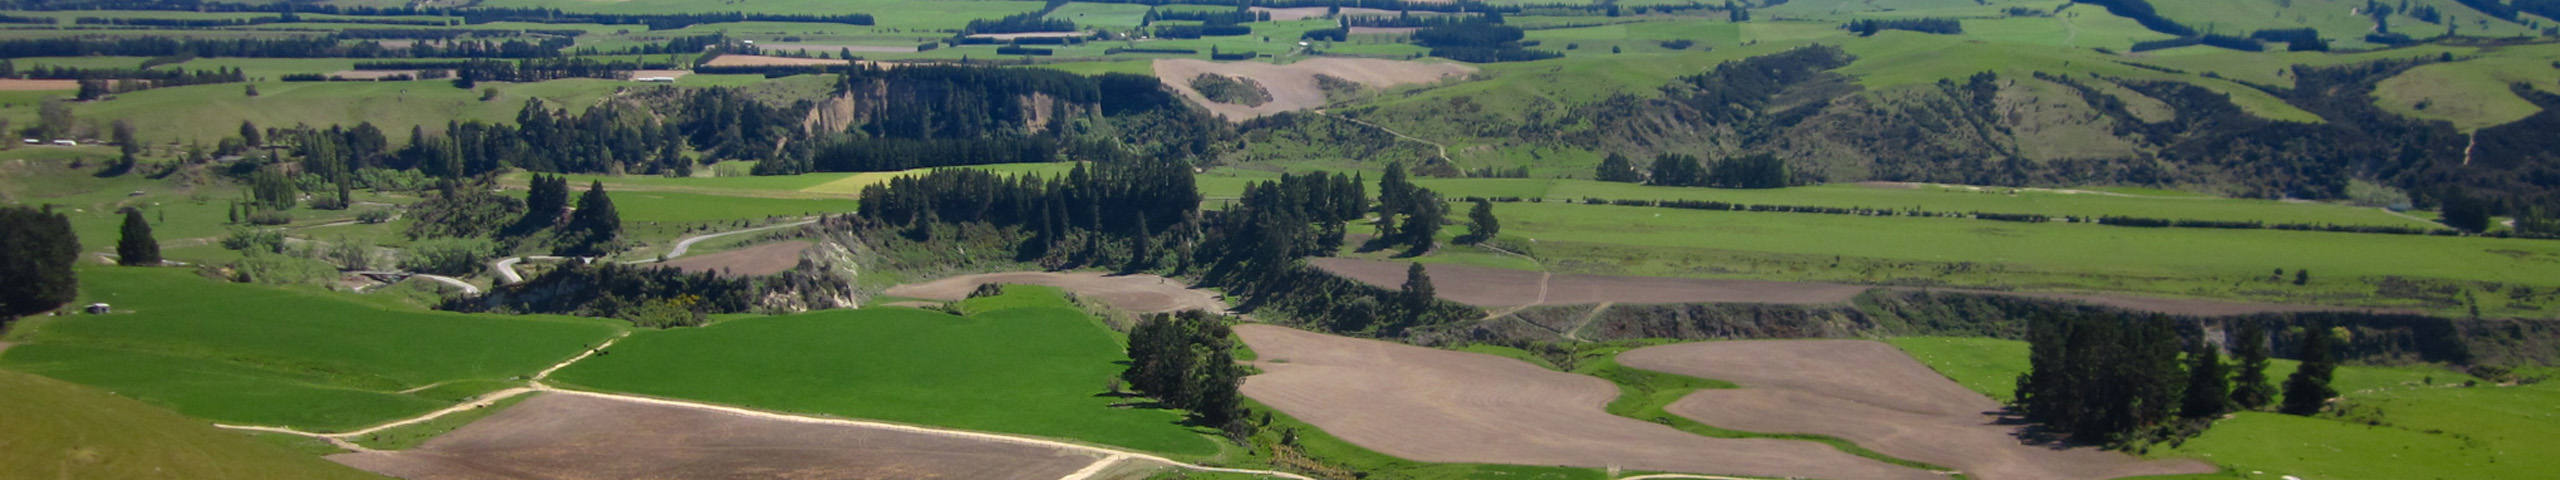 A landscape image of rolling hills with a patchwork of paddocks in various stages of cultivation